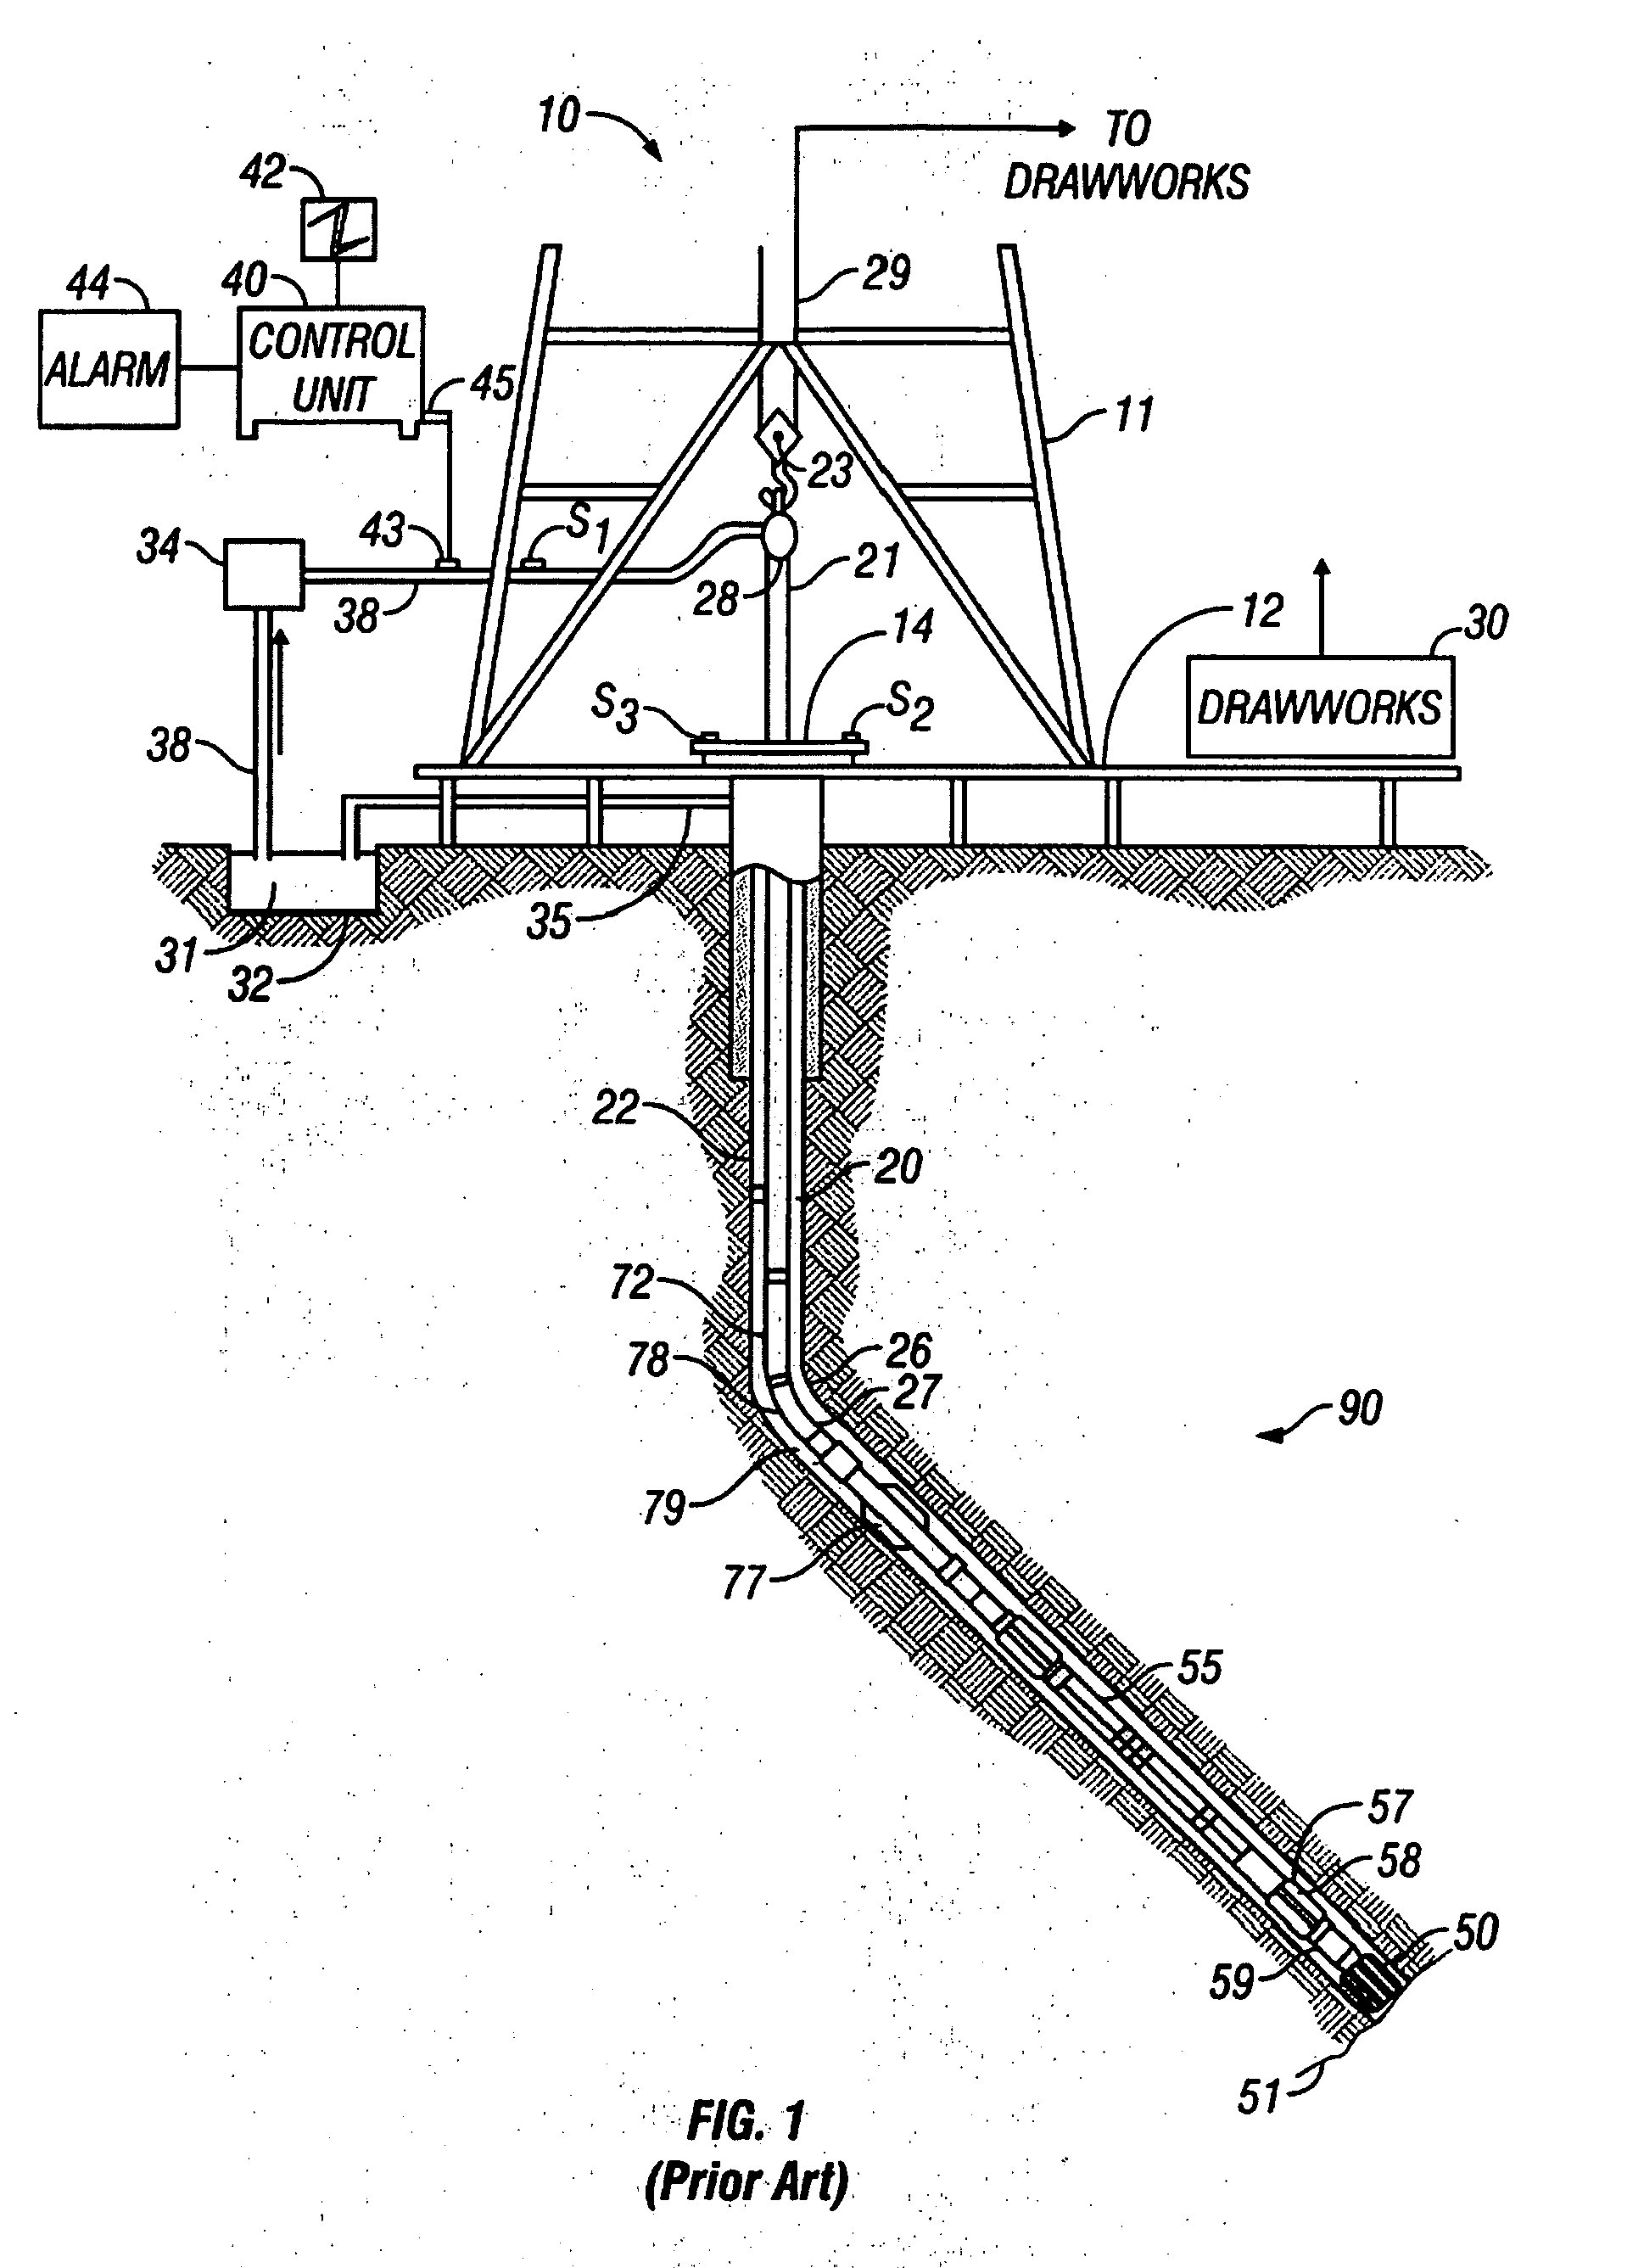 Method and apparatus for improved current focusing in galvanic resistivity measurment tools for wireline and measurement-while-drilling applications